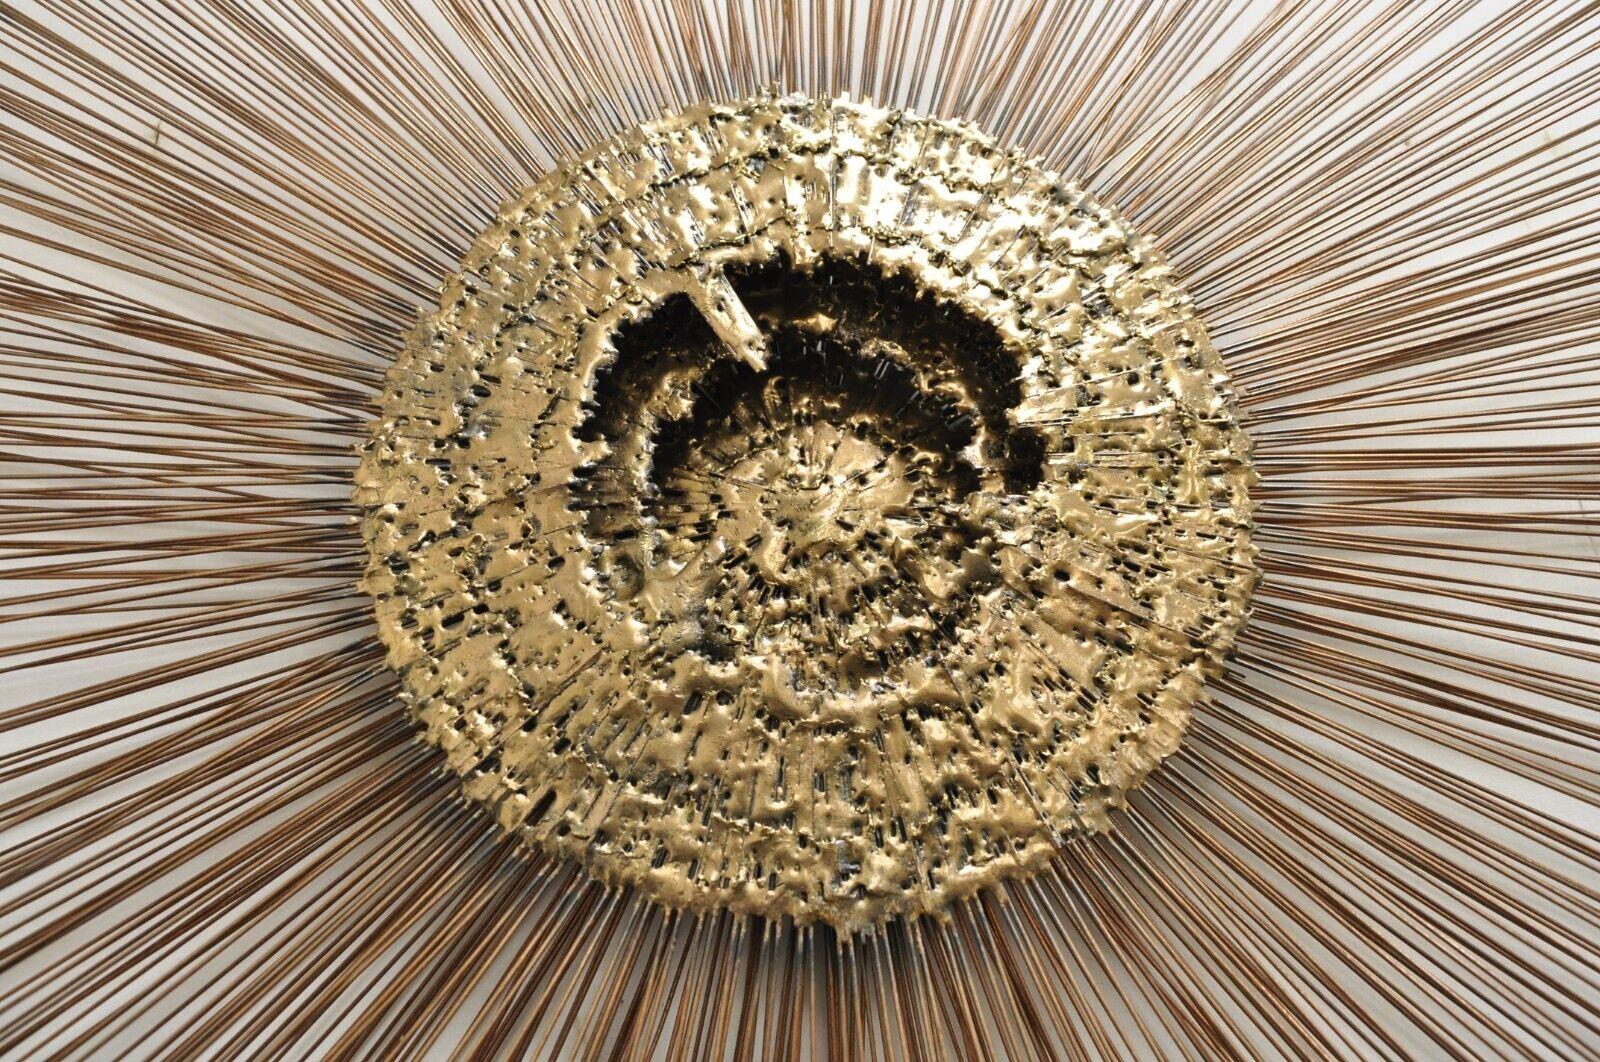 Vintage Sunburst Large Gilt Metal Brutalist Wall Sculpture attr. William & Bruce Friedle in the style of Curtis Jere. Item features Unique 3 tiered, 3 dimensional design, brutalist center, large impressive size. Unsigned but attributed to William &